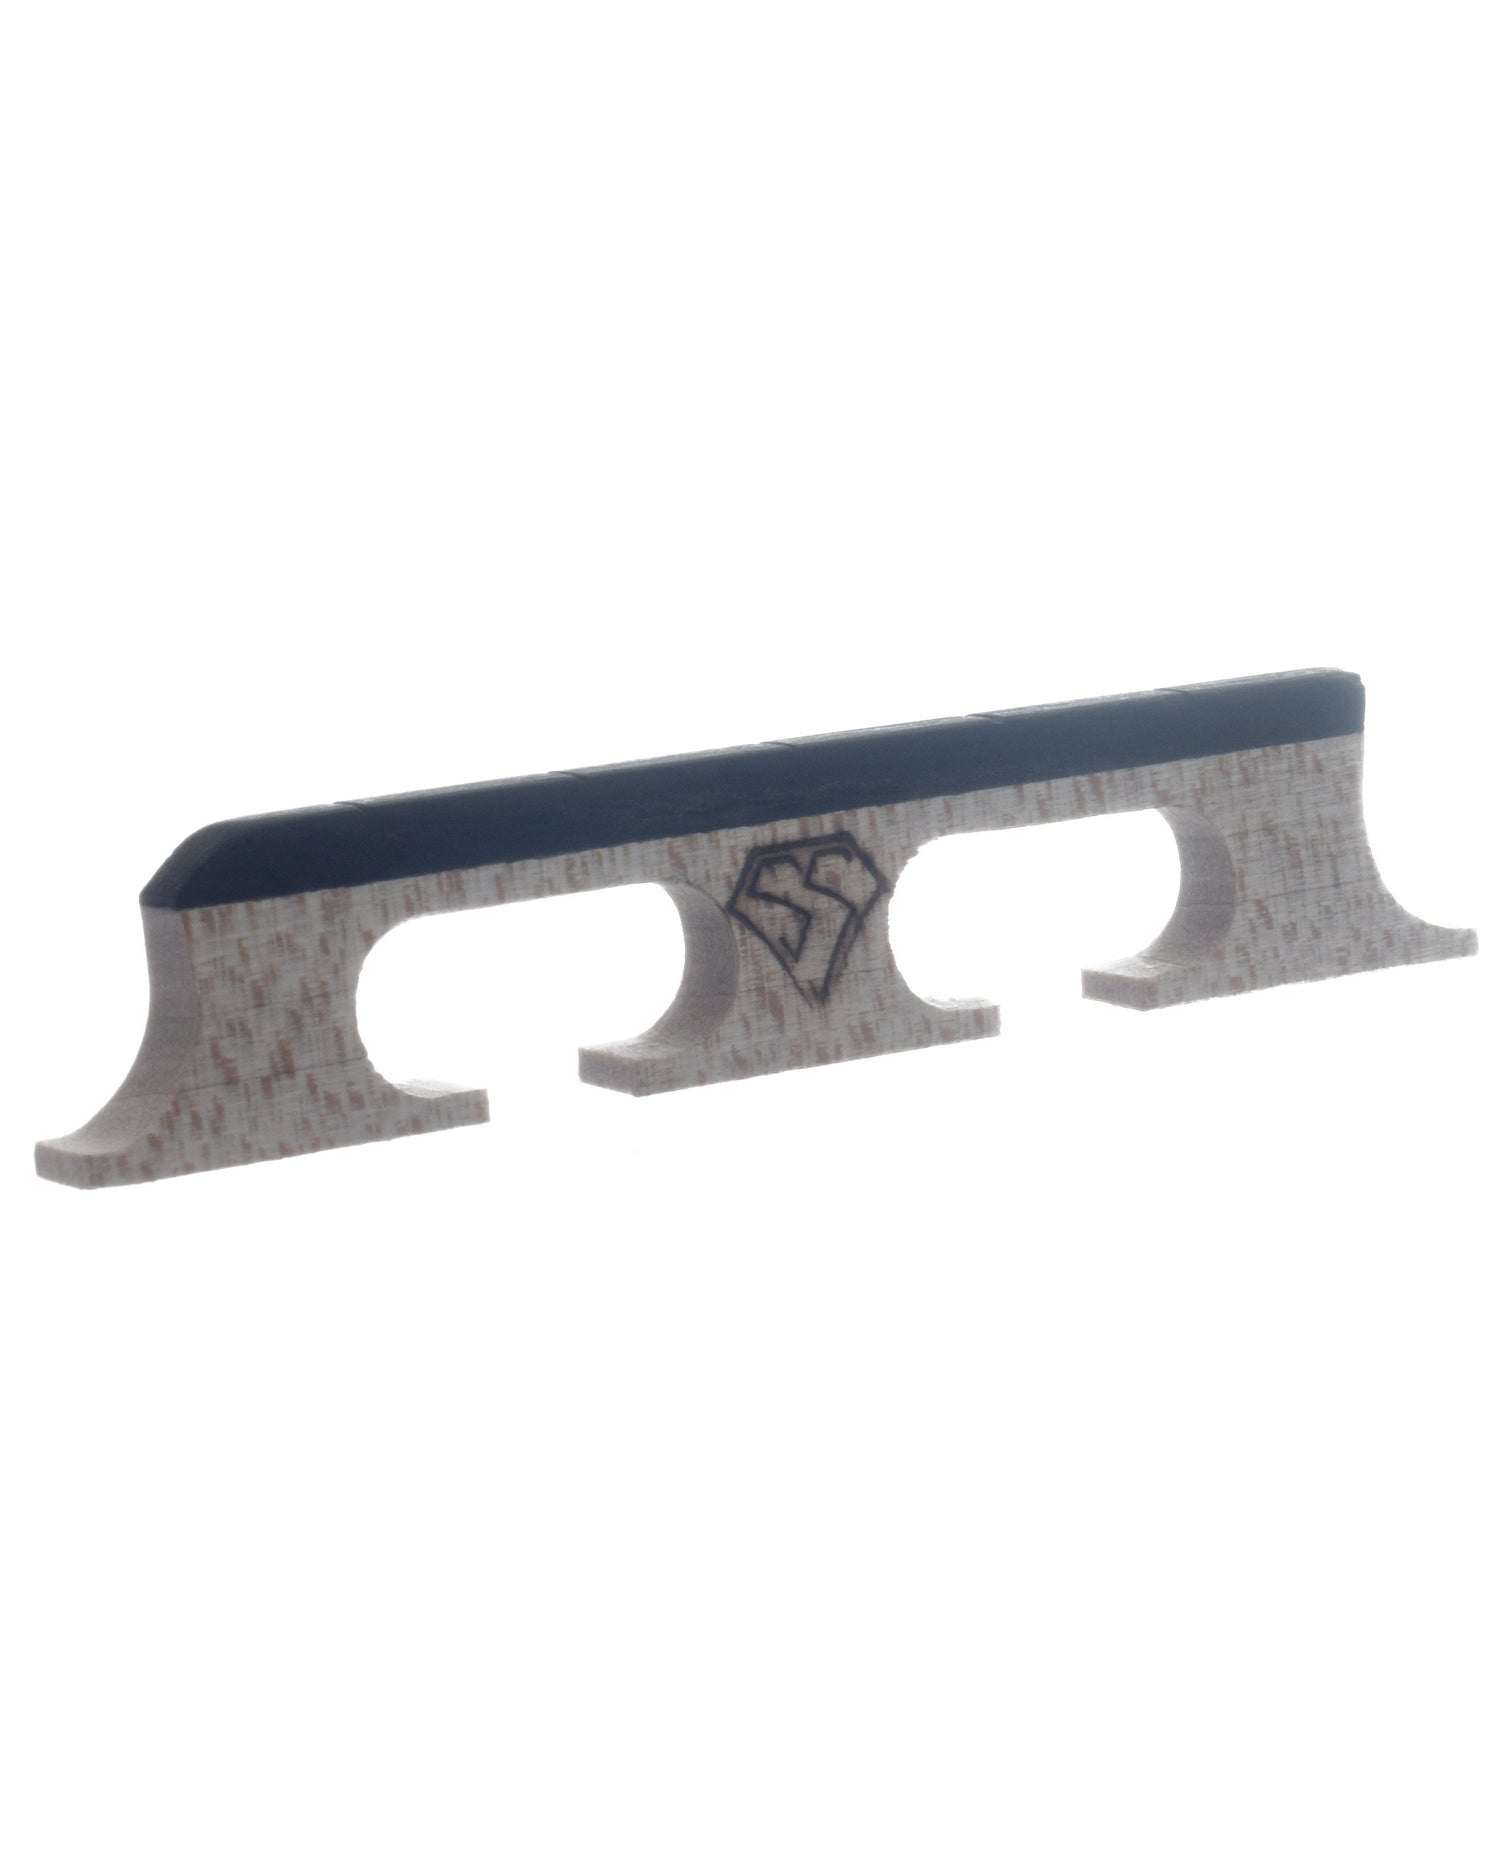 Image 1 of Snuffy Smith New Generation Banjo Bridge, 9/16" High with Crowe Spacing - SKU# SSNG-9/16-C : Product Type Accessories & Parts : Elderly Instruments